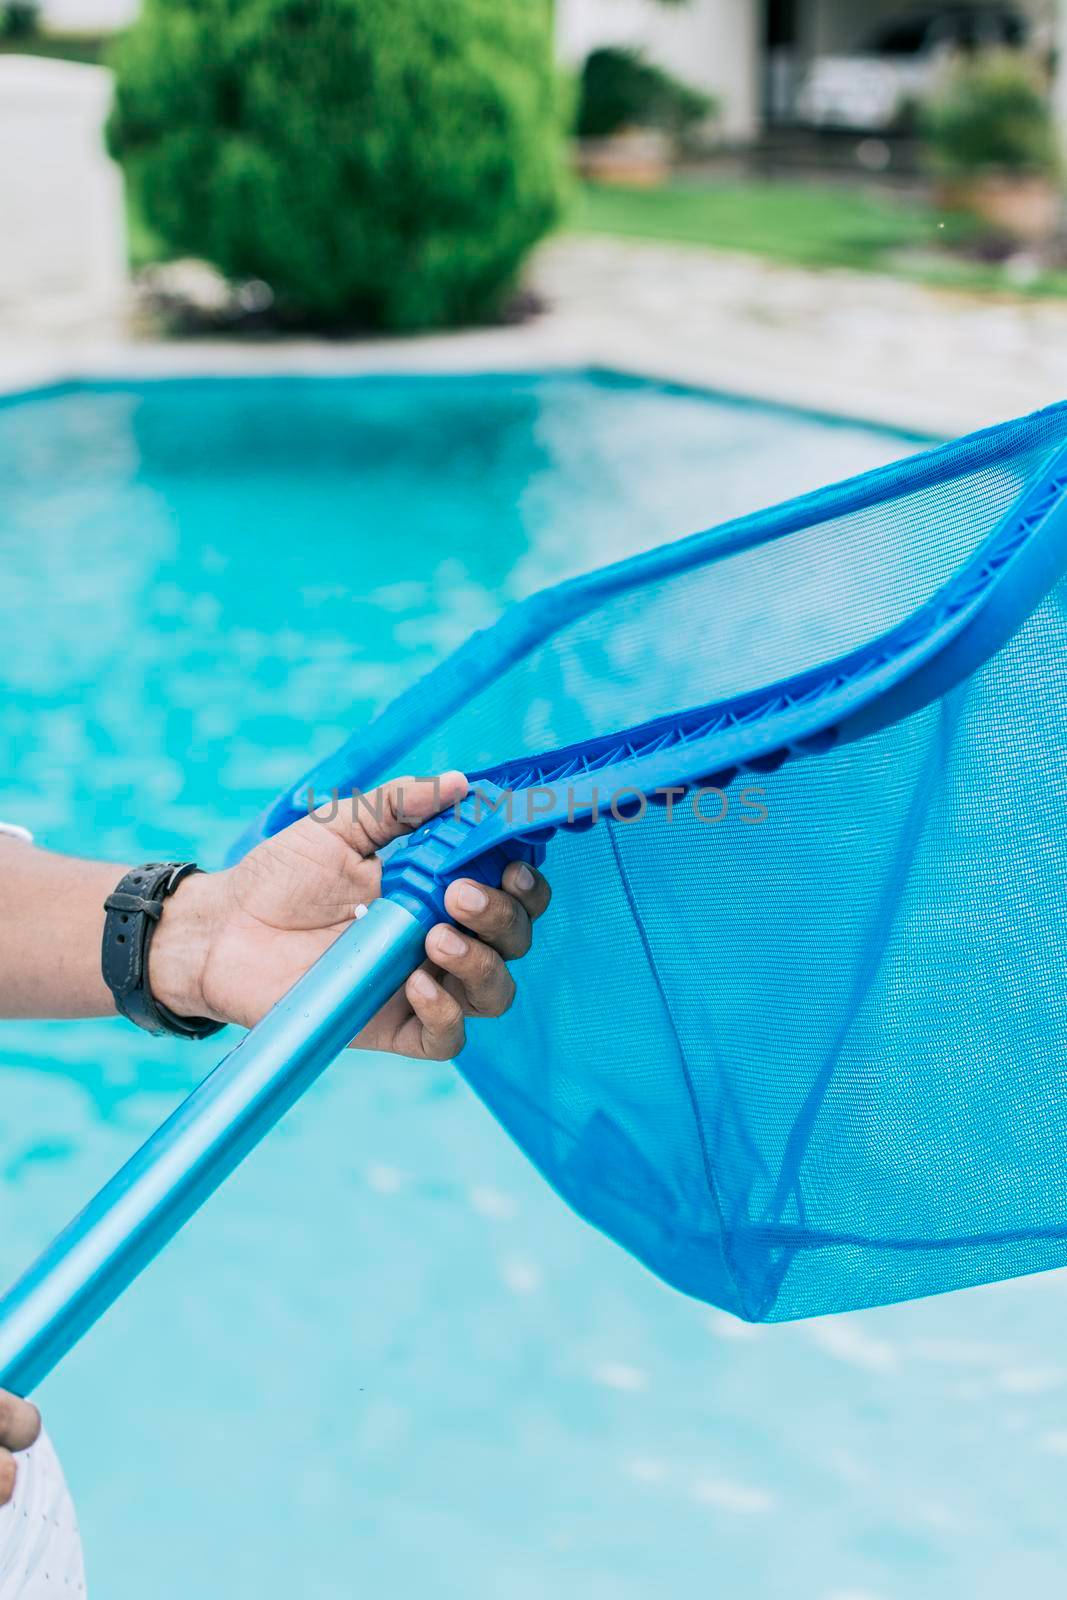 Hands holding a skimmer with blue pool in the background, A man cleaning pool with leaf skimmer. Man cleaning the pool with the Skimmer, Person with skimmer cleaning pool